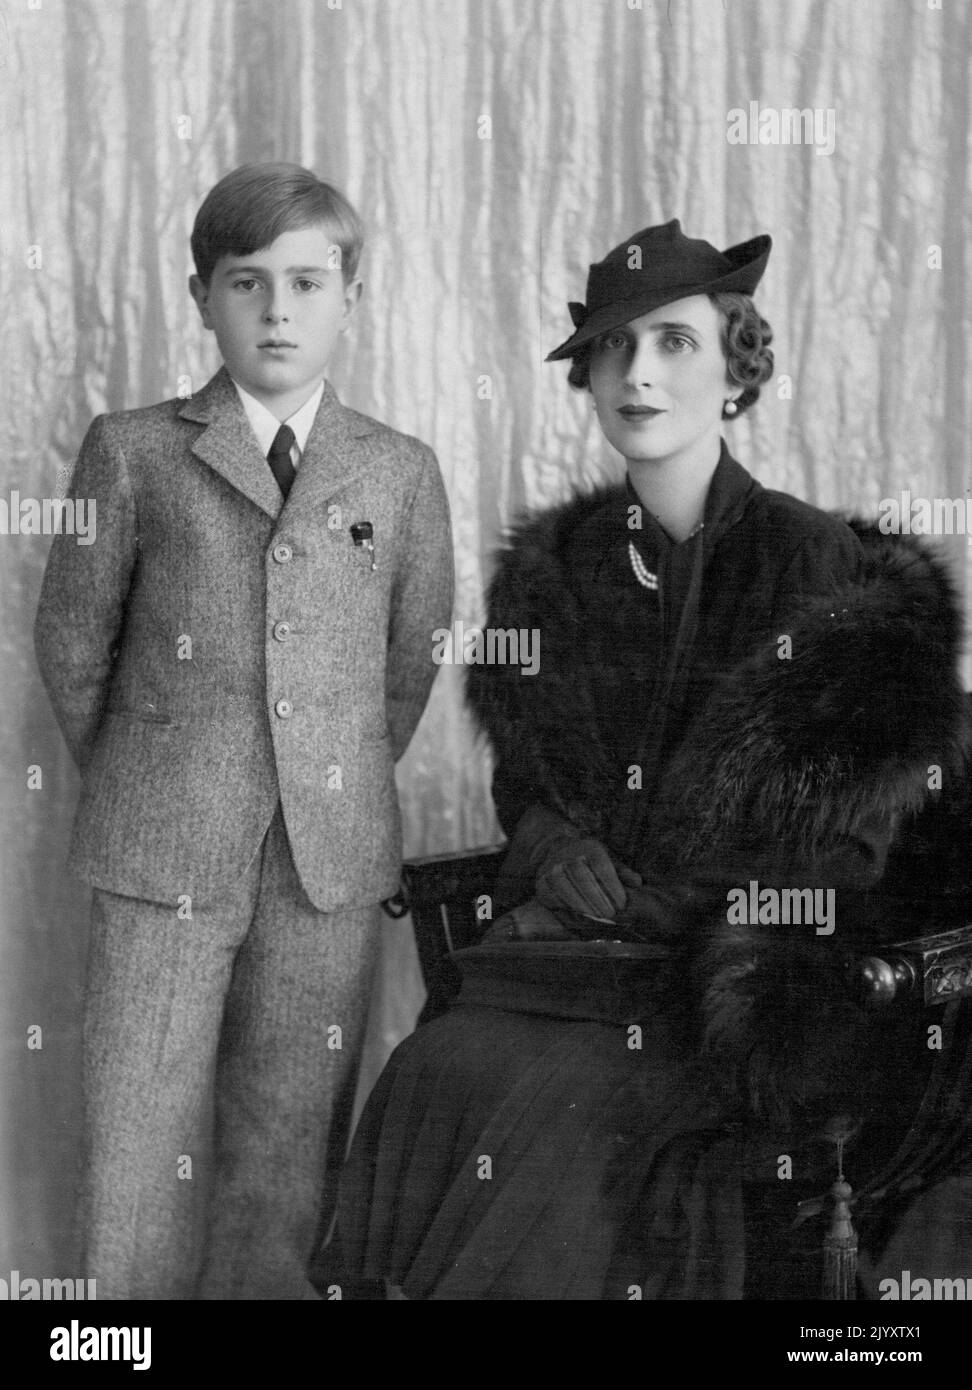 Lovely Sister of our Lovely Duchess with her son - Wife of the Prince Regent of Yugoslavia - Her Royal highness Princess Paul of Yugoslavia with her son Prince Nicholas. Her Royal highness Princess Paul of Yugoslavia who is in England on a visit is the wife of H.R.H. Prince Paul of Yugoslavia. She is the daughter of T.R.H. Prince and Princess Nicholas of Greece and sister of H.R.H. The Duchess of Kent. Her son Prince Nicholas has just entered on his first term at Sandroyd school where his cousin Prince Tomislav is now in his third term. This is the same school that little King Peter of Yugosla Stock Photo